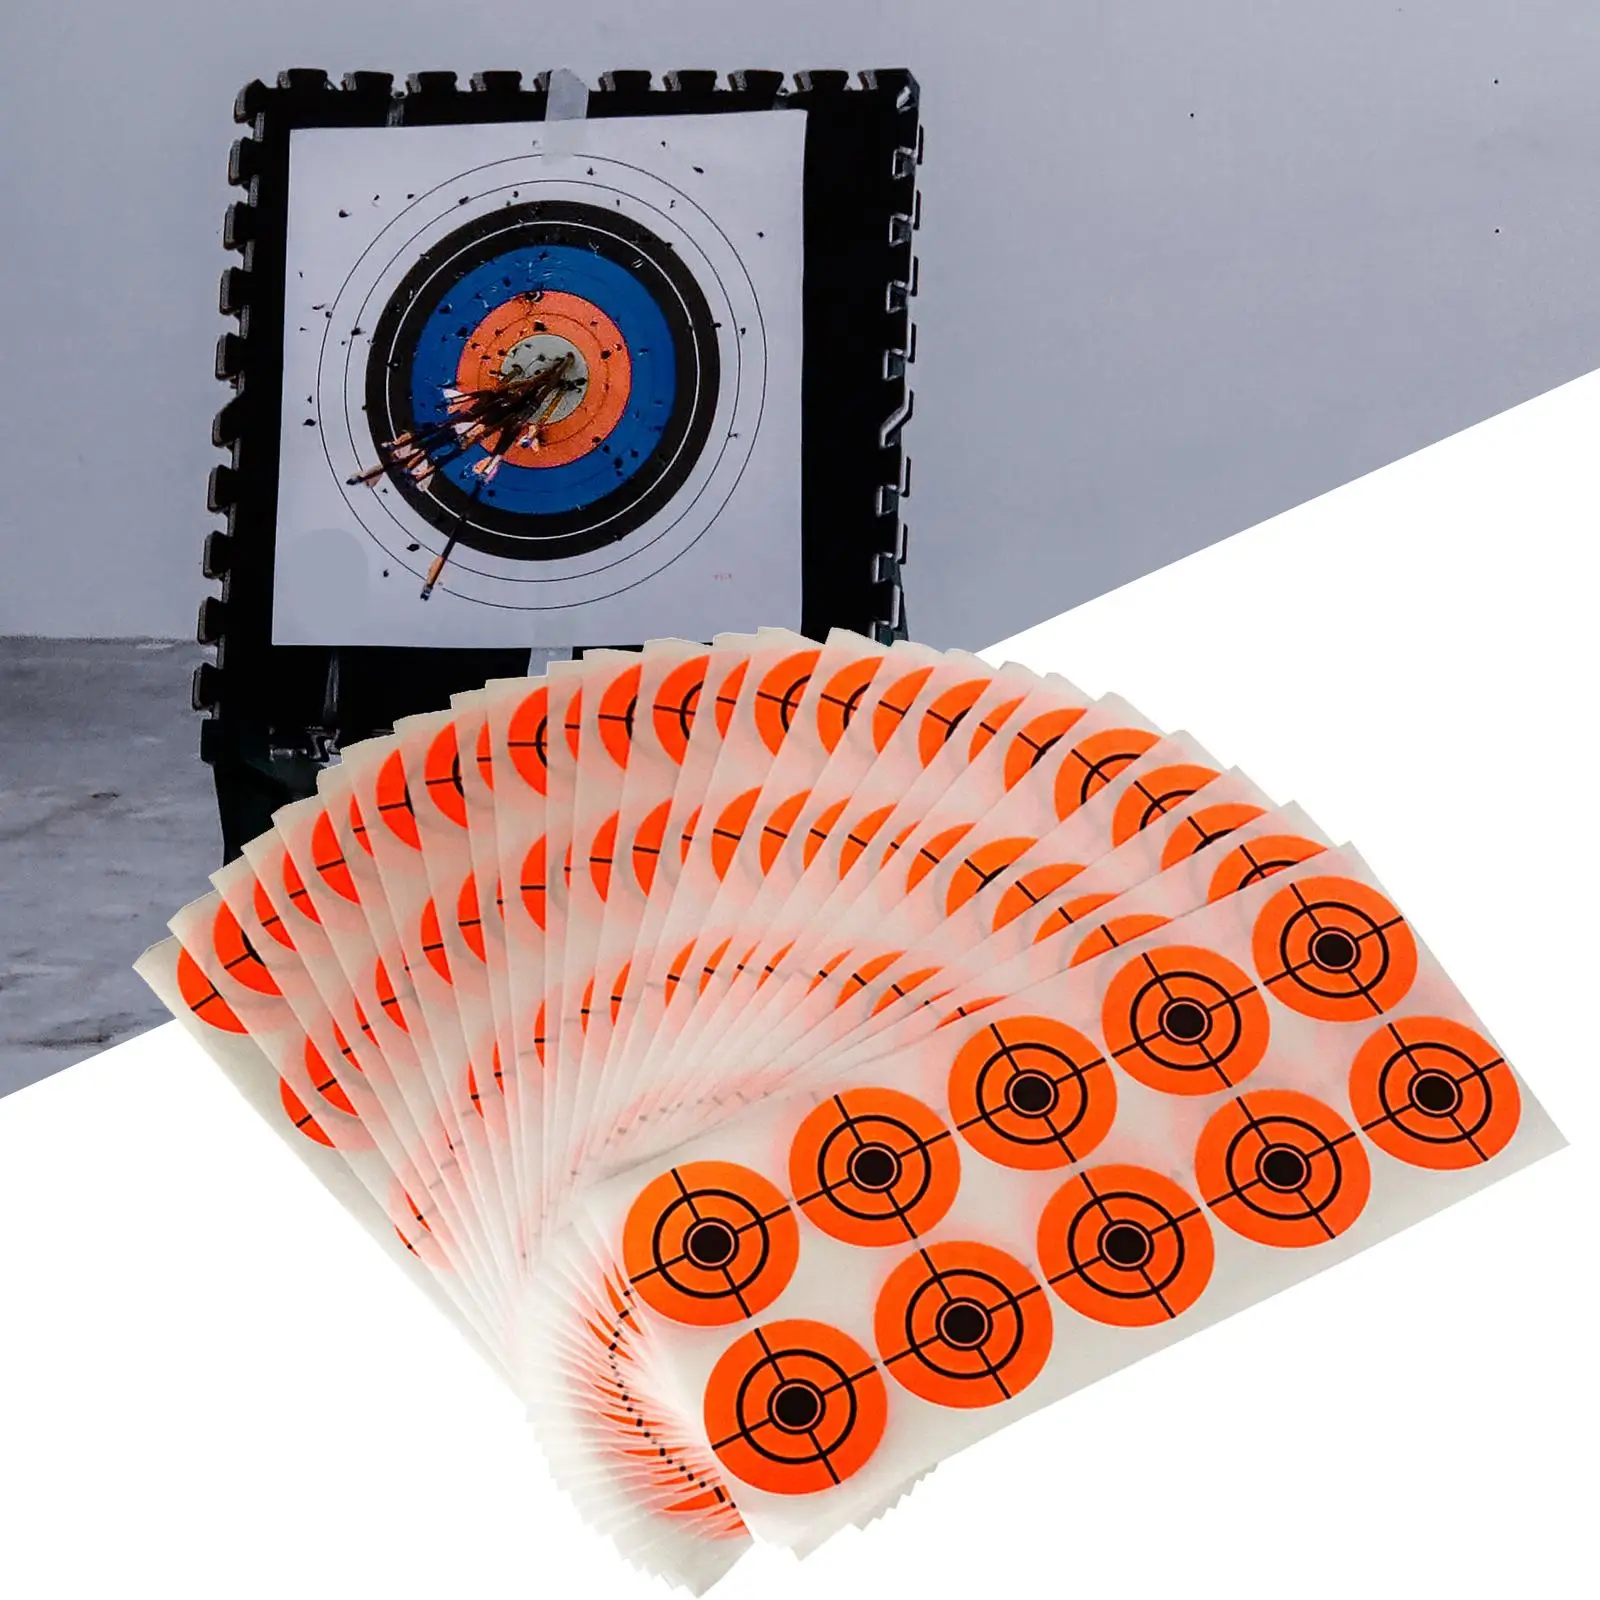 25 Sheets Target Stickers Shooting Practice Paper Stickers 1.57inch Outdoor Round Targets Reactive Target Accessories Training